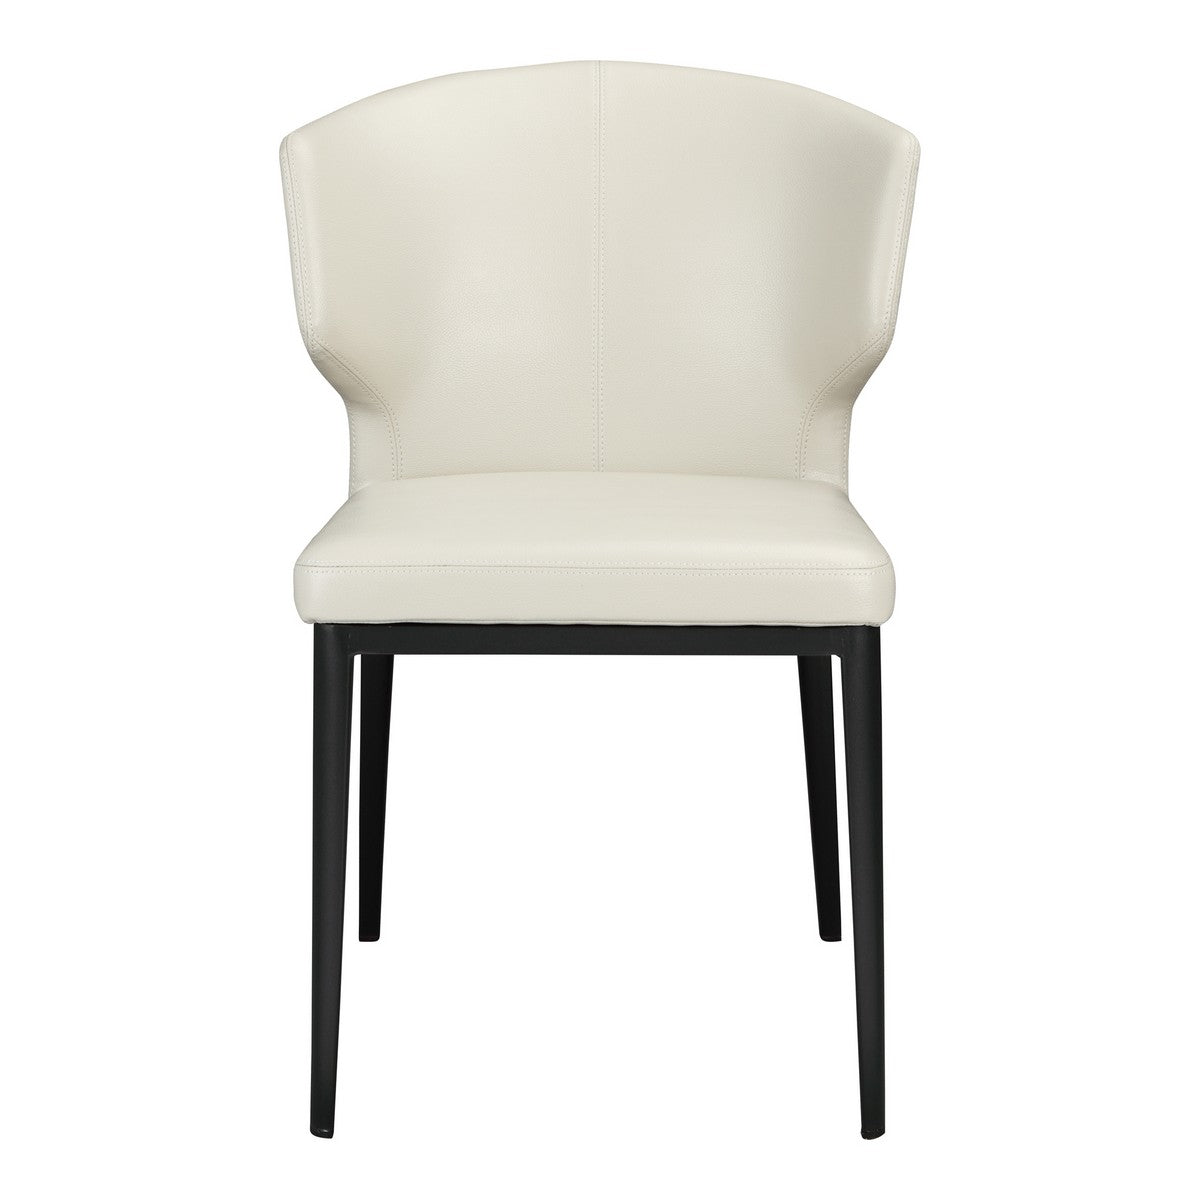 Moe's Home Collection Delaney Side Chair Beige-Set of Two - EJ-1018-34 - Moe's Home Collection - Dining Chairs - Minimal And Modern - 1